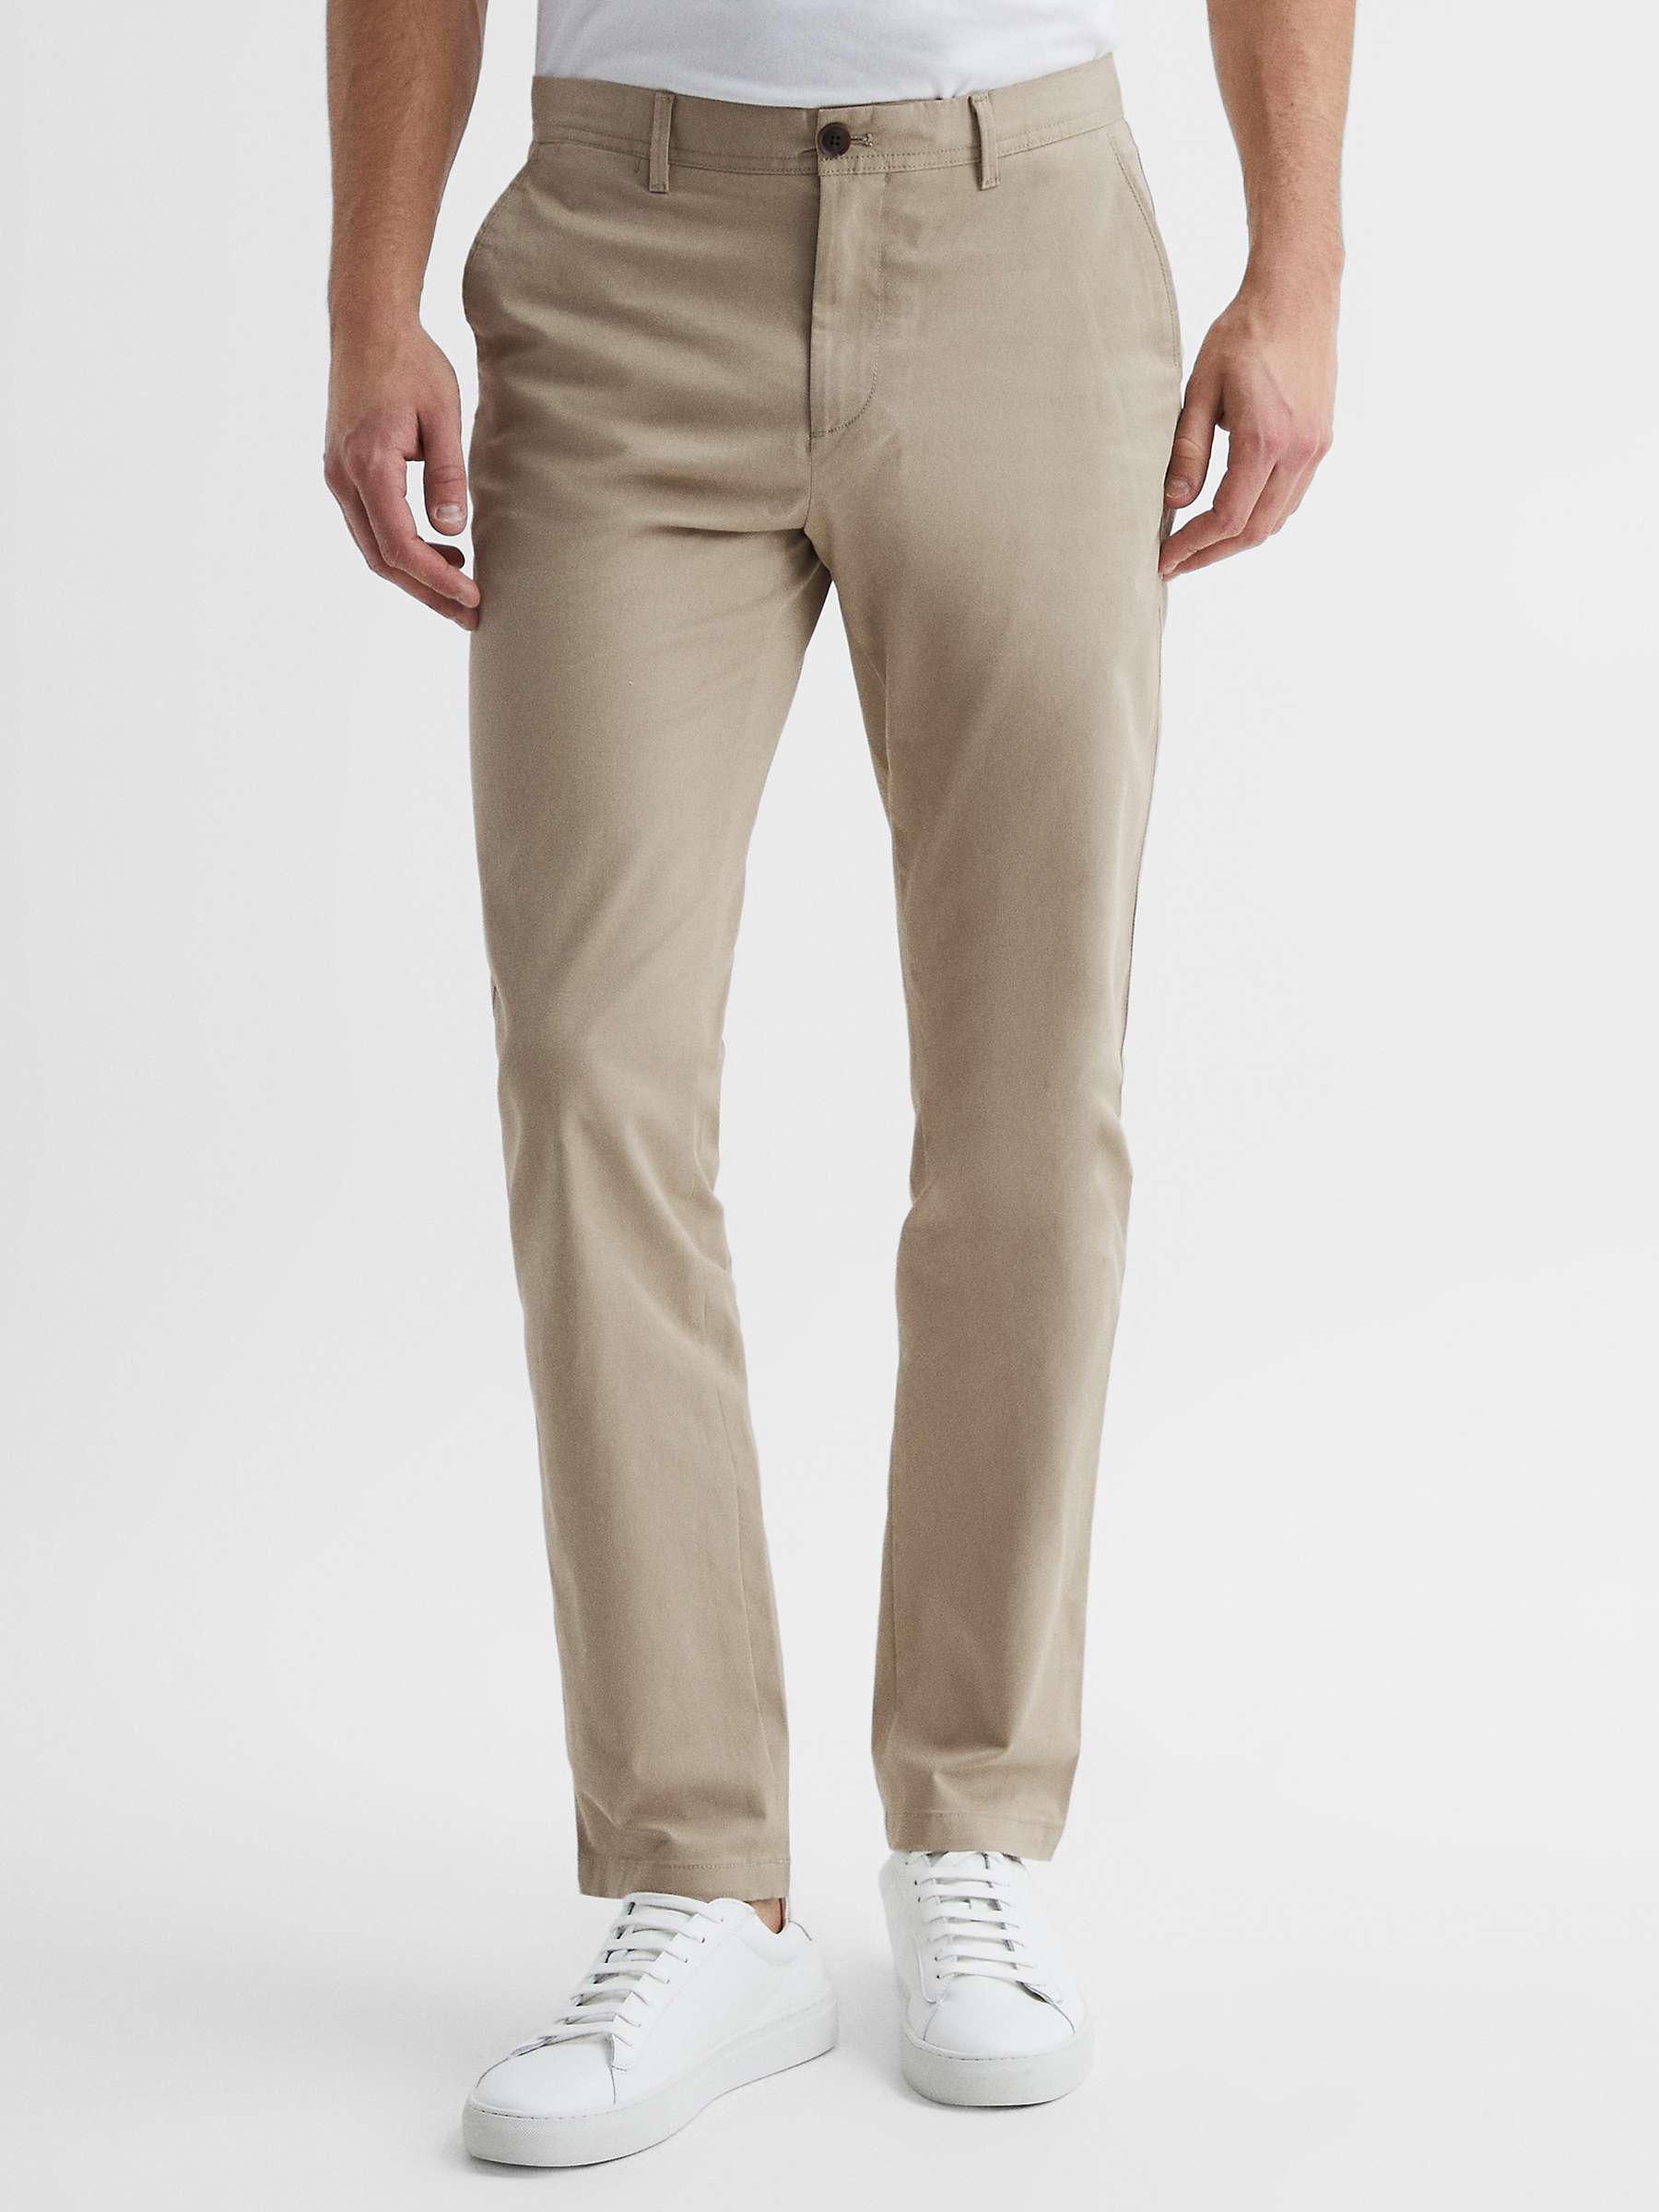 Reiss Pitch Slim Fit Stretch Cotton Chino Trousers, Stone at John Lewis ...